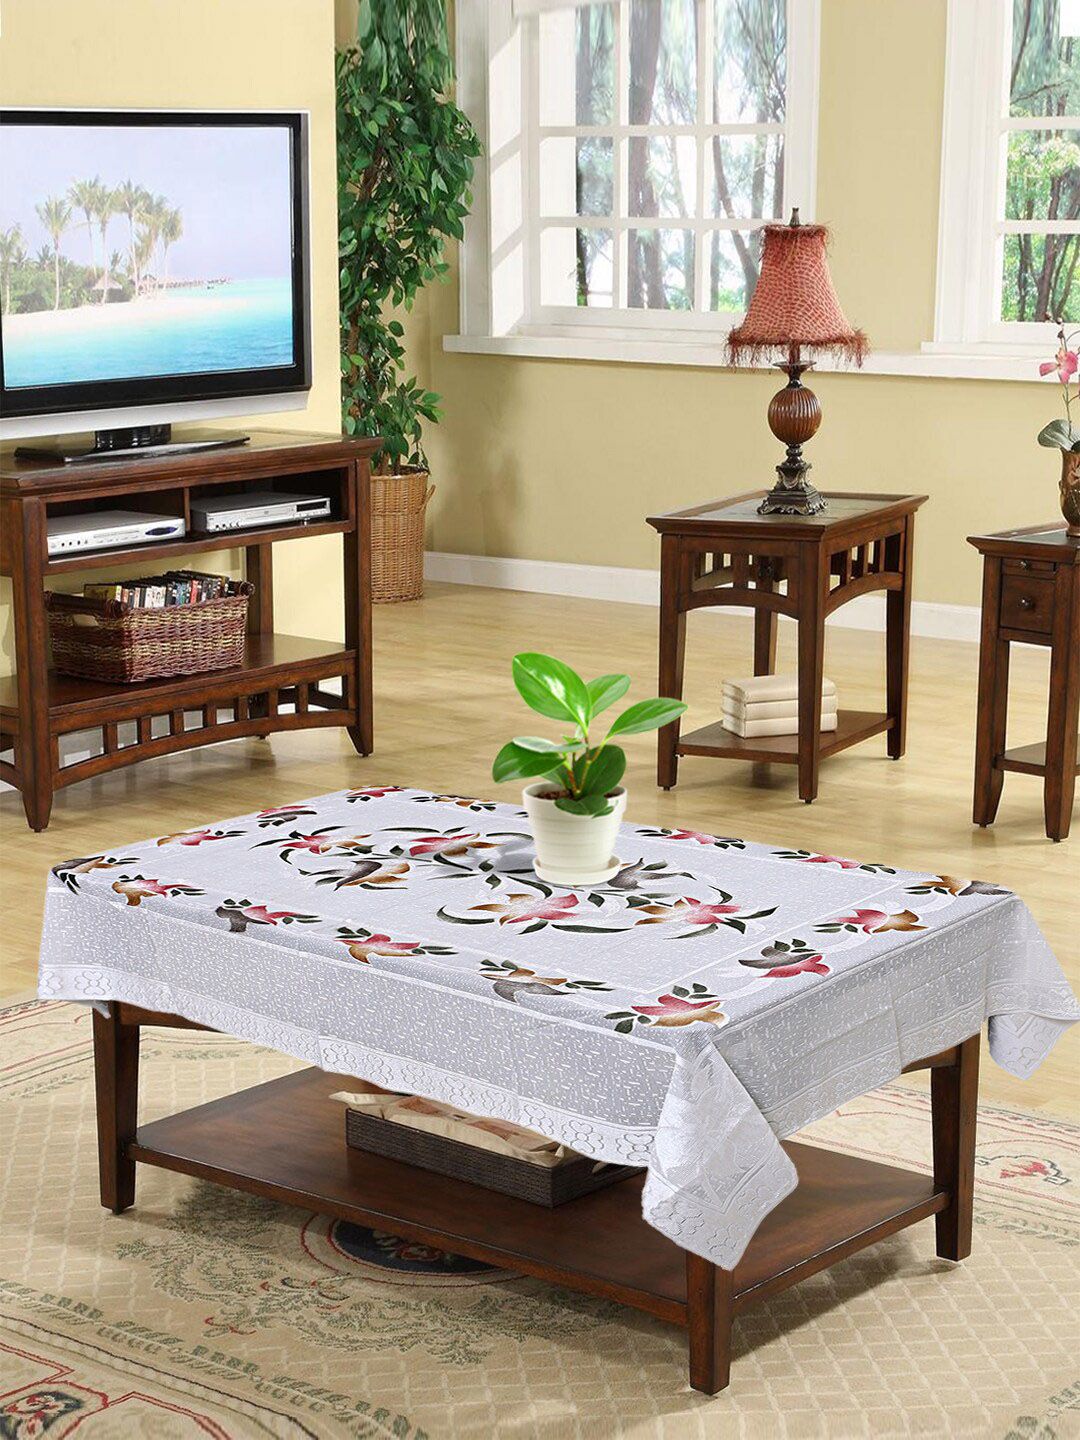 Kuber Industries White & Pink Floral Printed 4-Seater Rectangle Cotton Table Cover Price in India